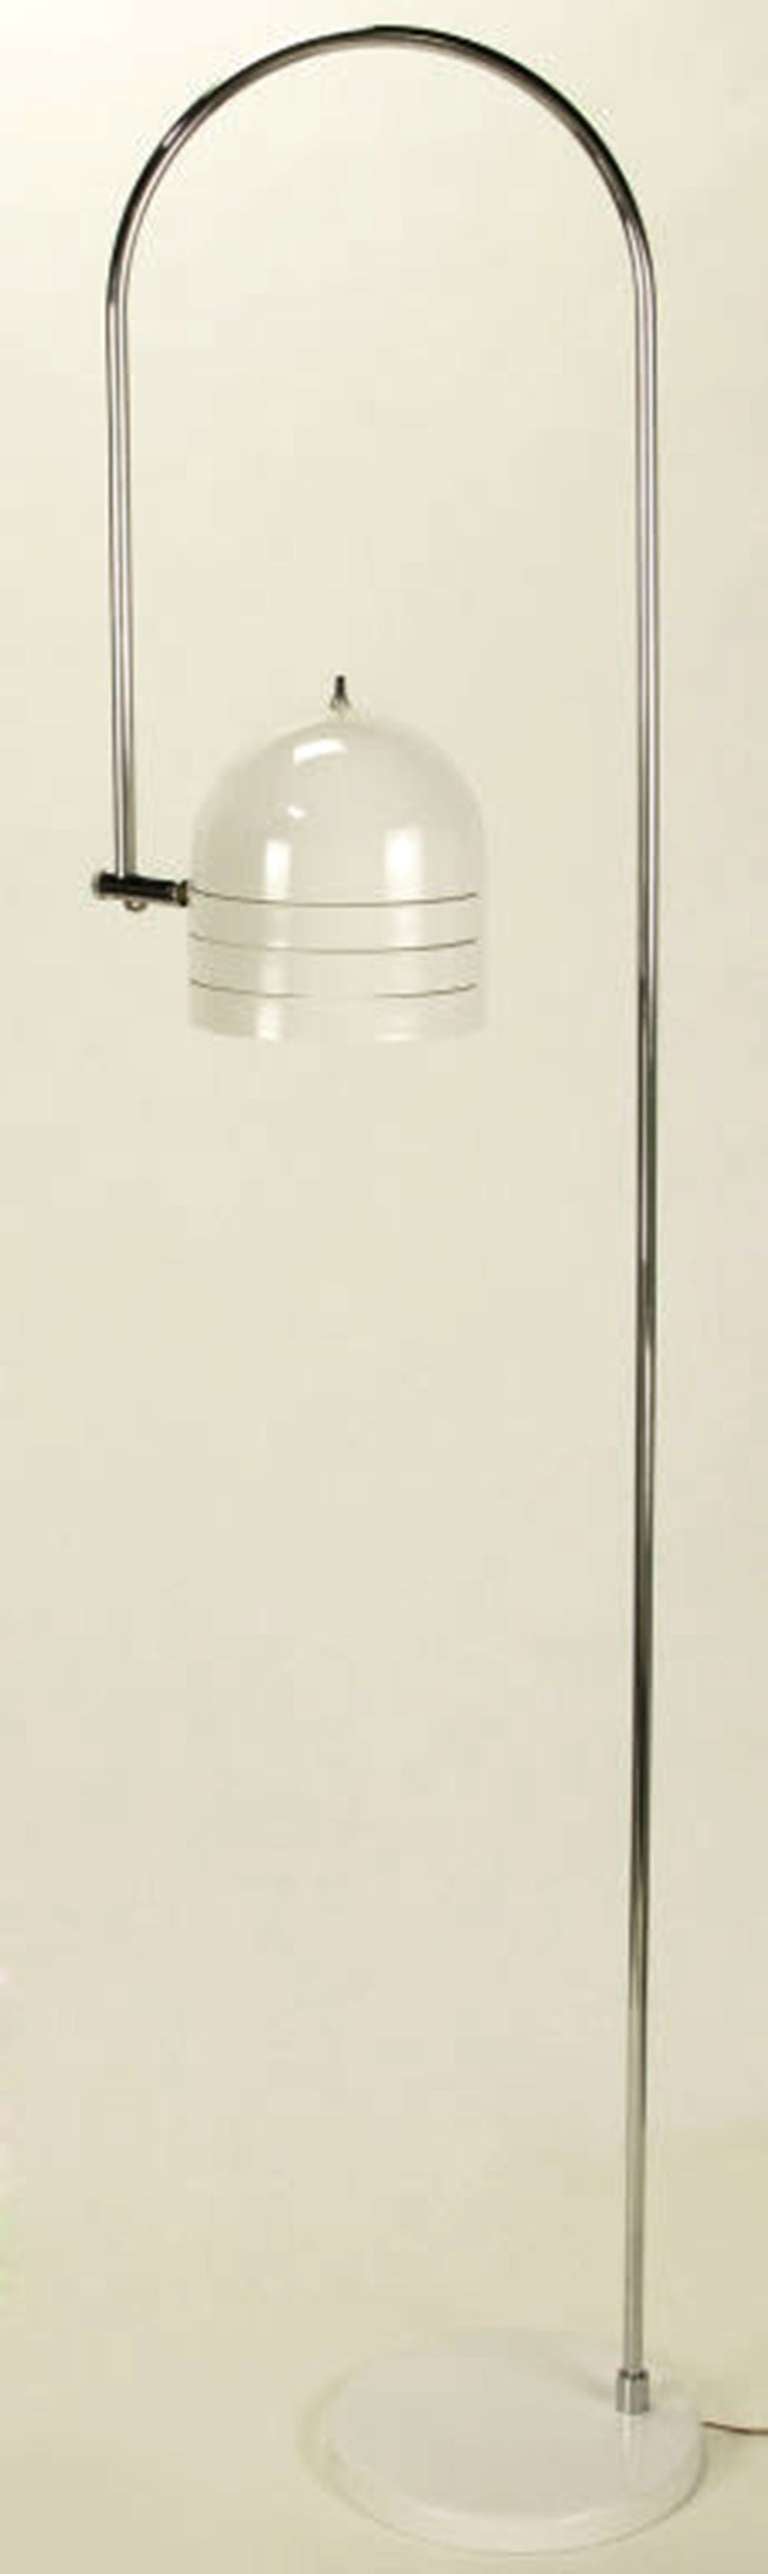 Raymor Italian Chrome and White Enameled Metal Arced Floor Lamp In Excellent Condition For Sale In Chicago, IL